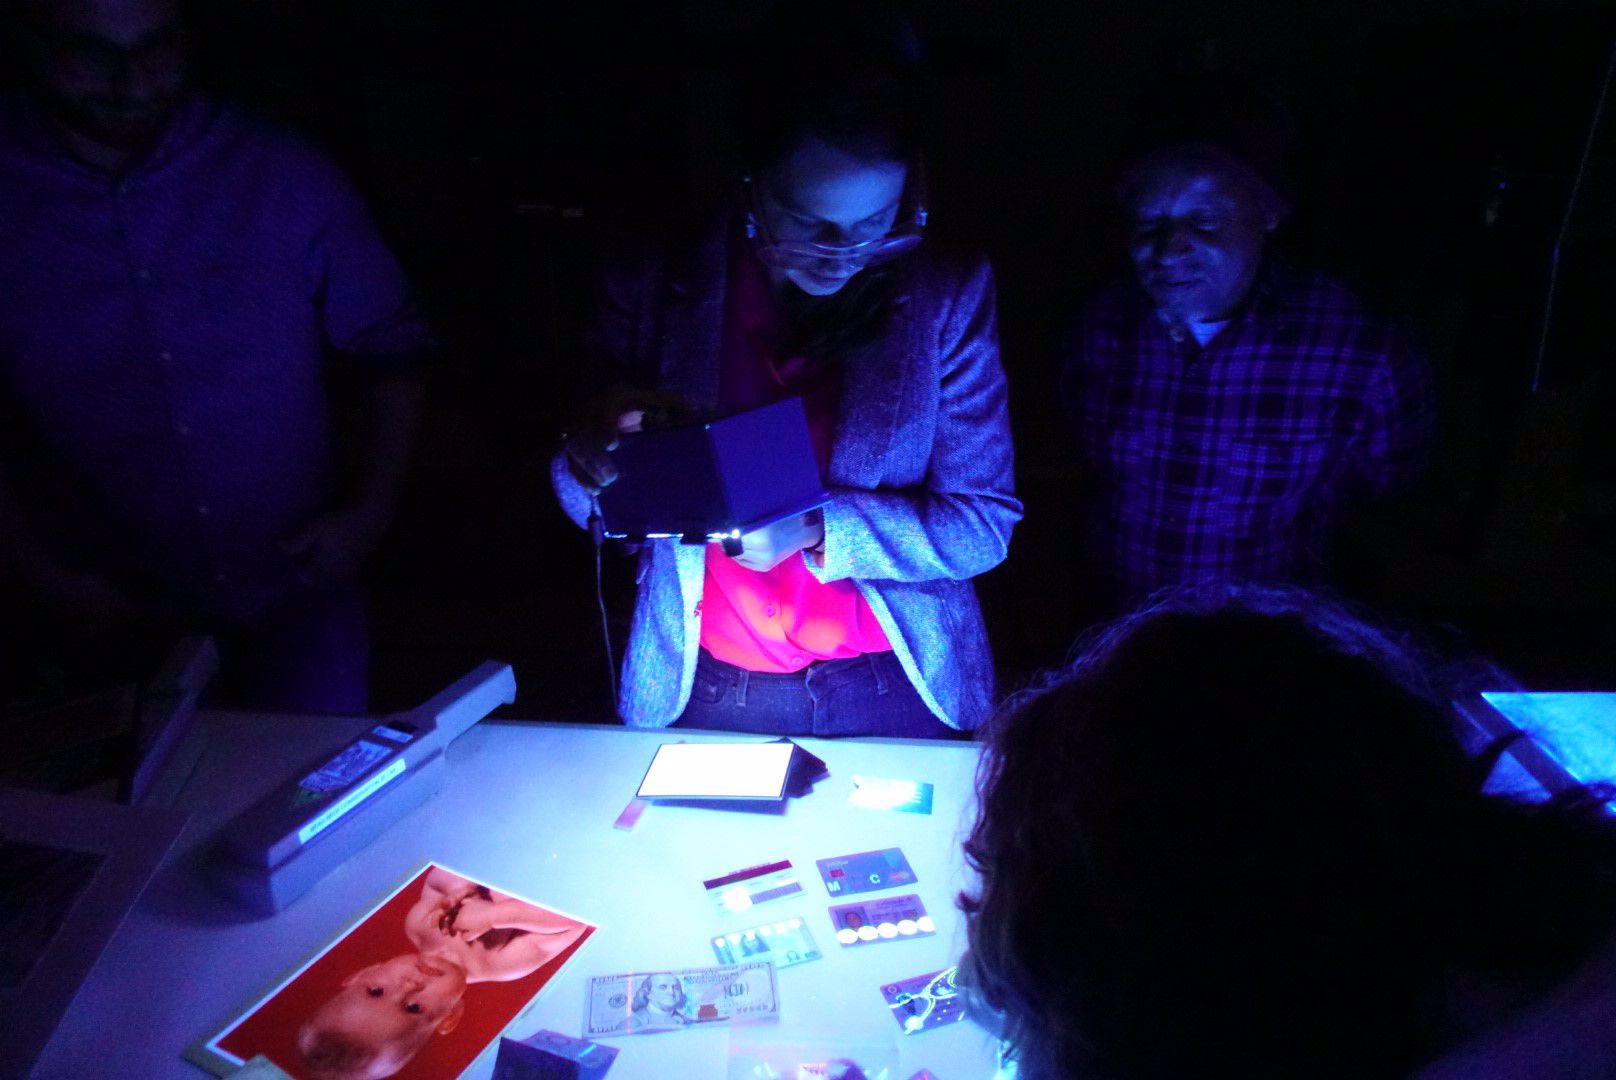 Beyond Visible: UV-Visible Fluorescence in Works of Art, Inside the MFAH